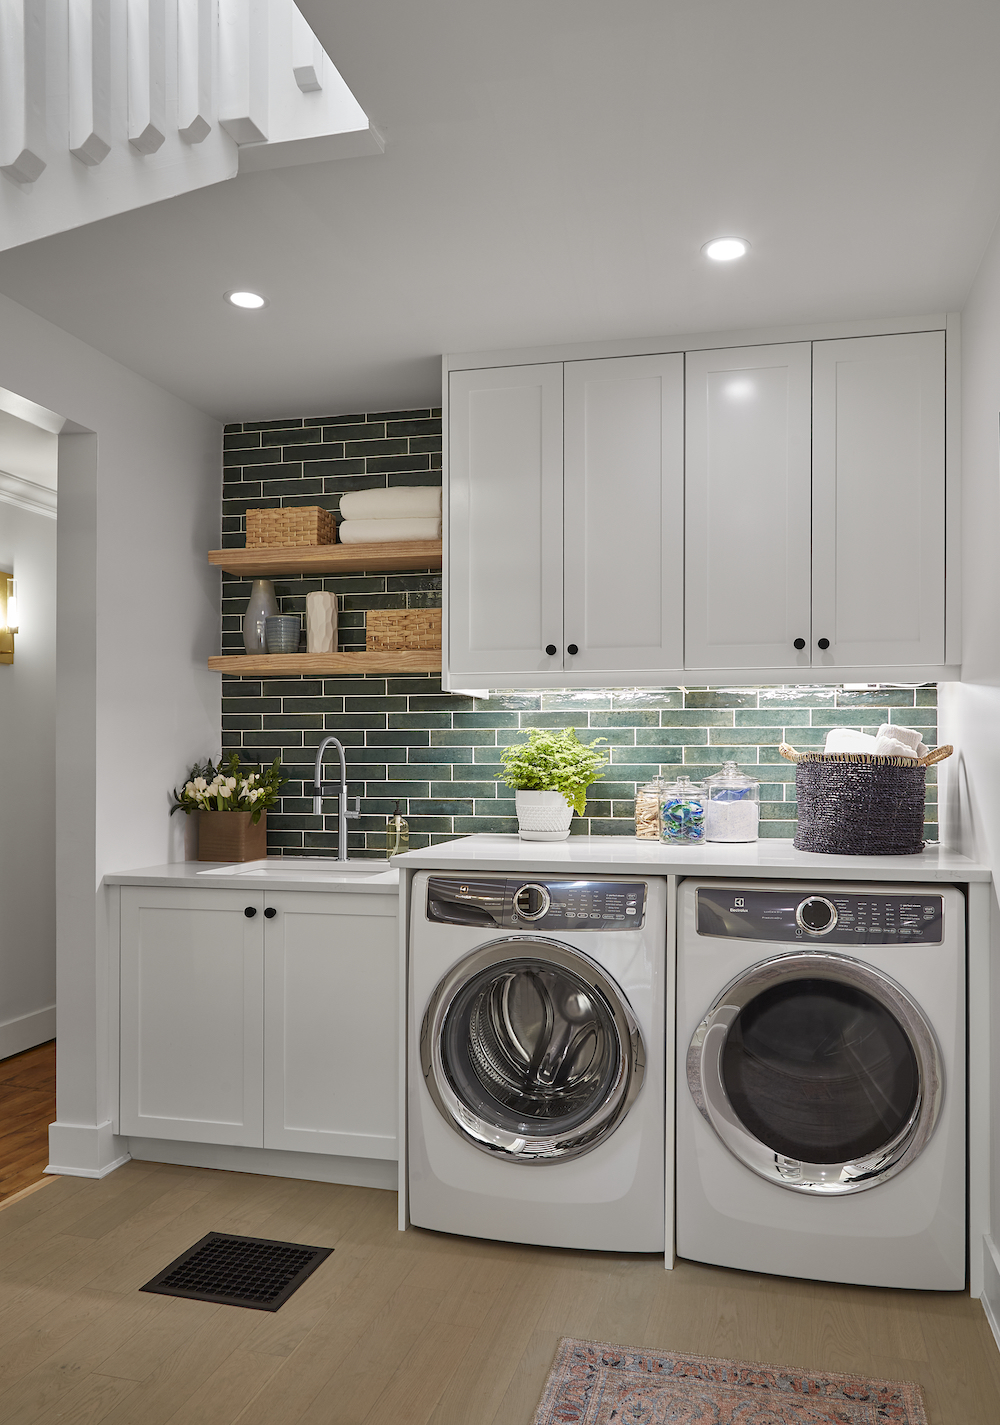 A new laundry room in the new landing